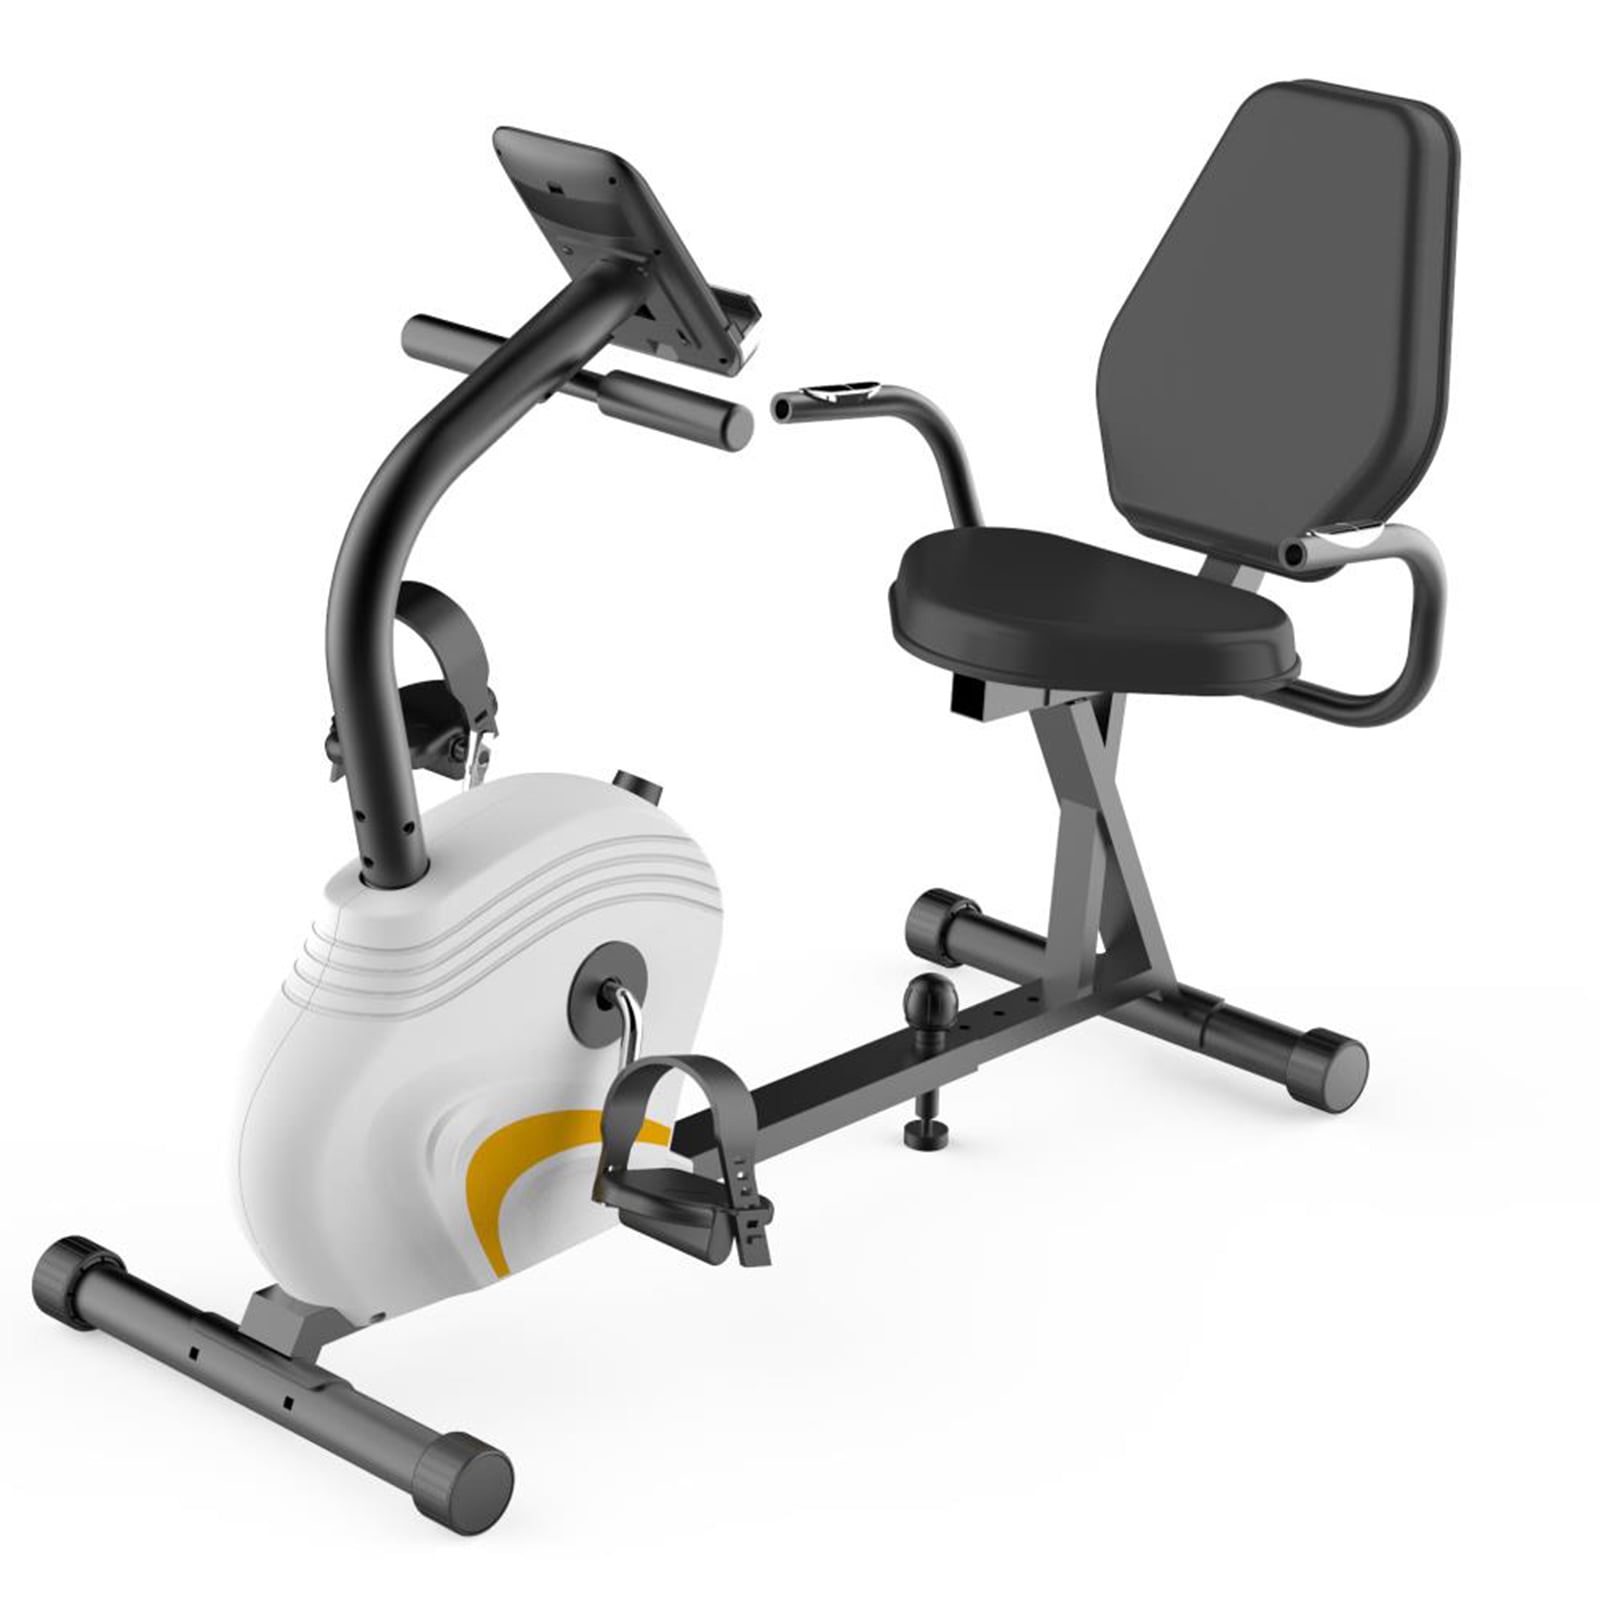 Home/Office Recumbent Exercise Bike - Bicycle Pedaling ...